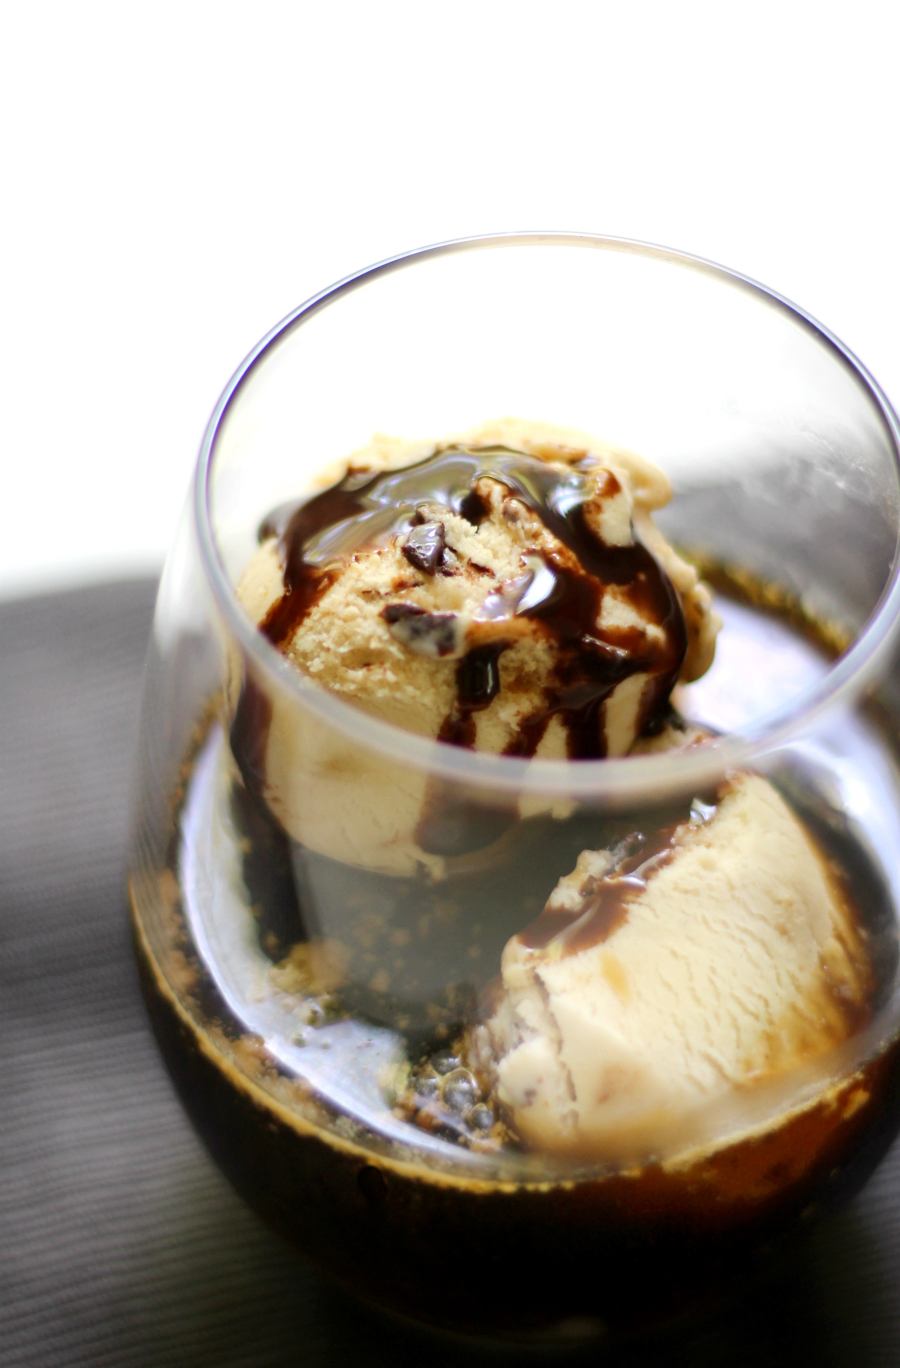 Chocolate Caramel Affogato (Gluten-Free, Vegan) | Strength and Sunshine @RebeccaGF666 The easiest 2 ingredient Chocolate Caramel Affogato recipe that's gluten-free and vegan! A decadent buzz-worthy treat to prepare on a date night or girl's night! This twist on the classic Italian dessert will be your new favorite coffee and ice cream treat!